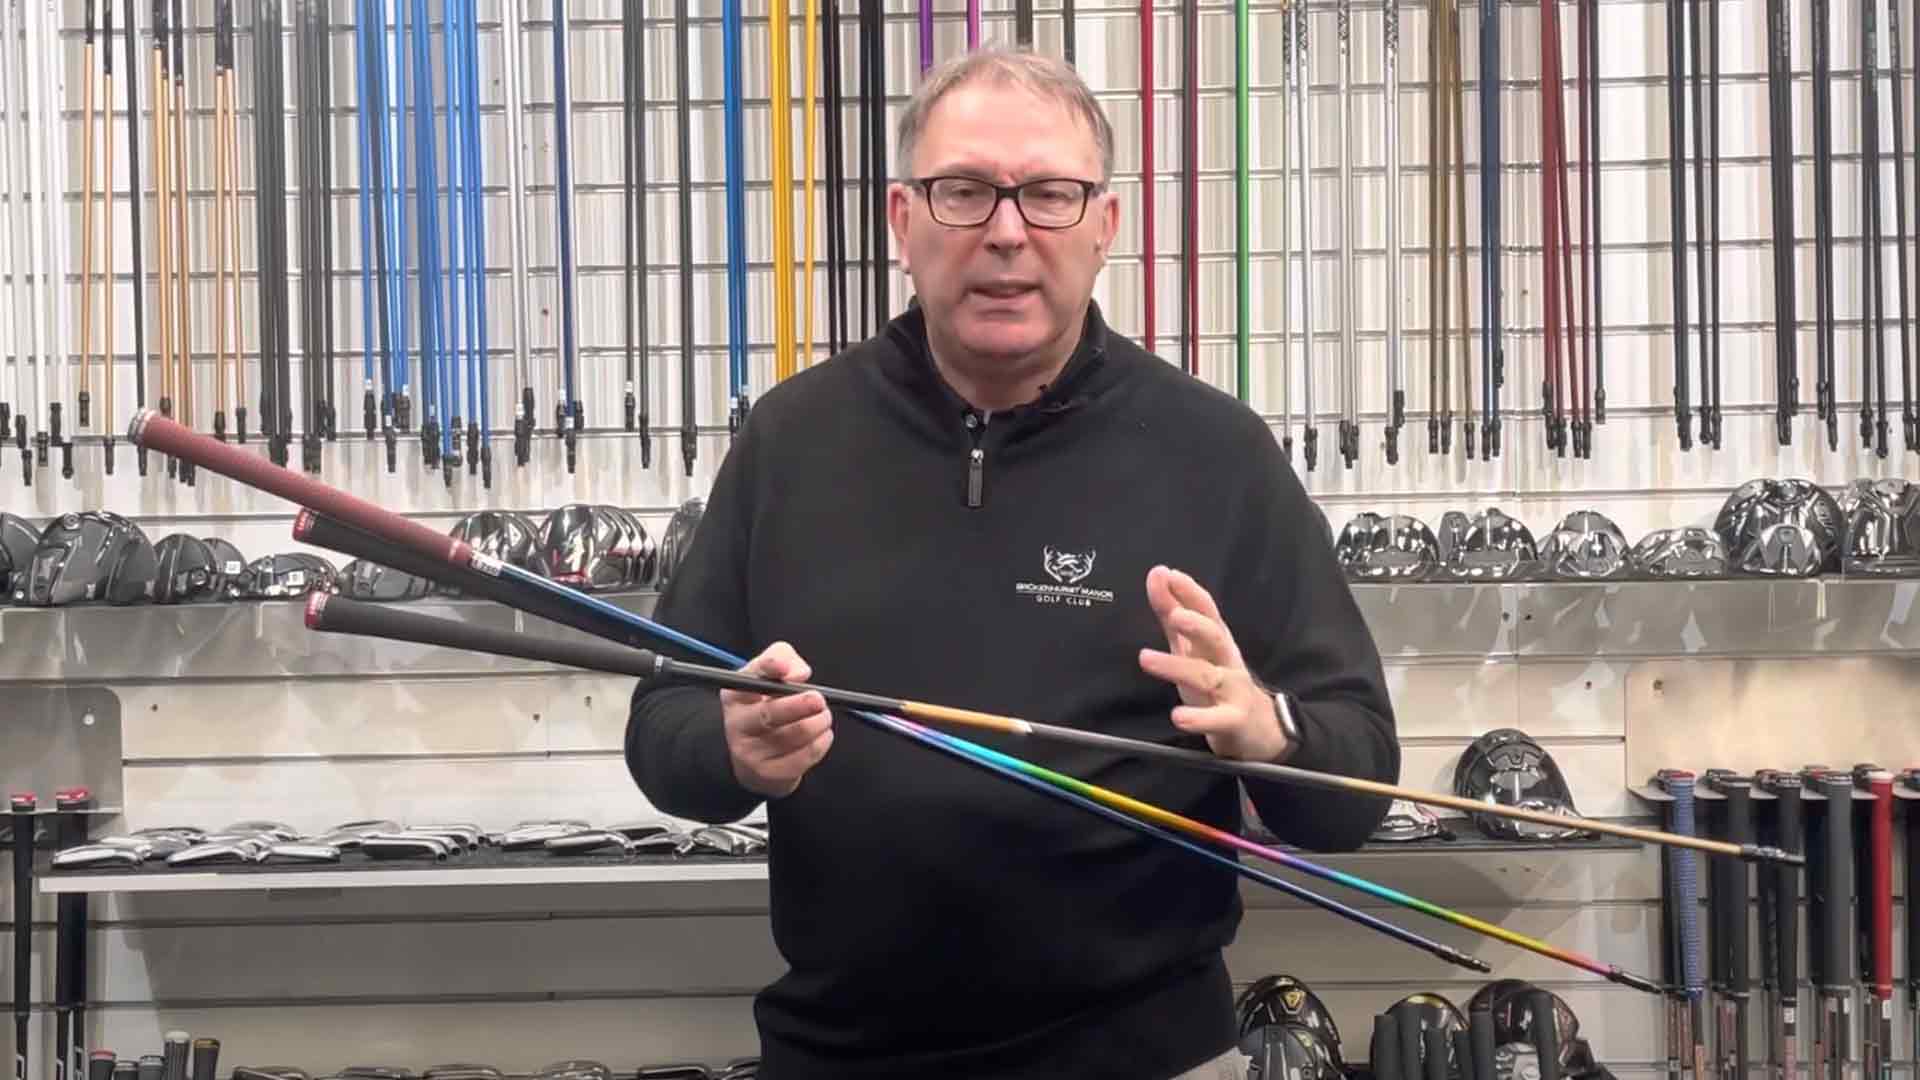 Why are Super Premium Shafts the price they are?